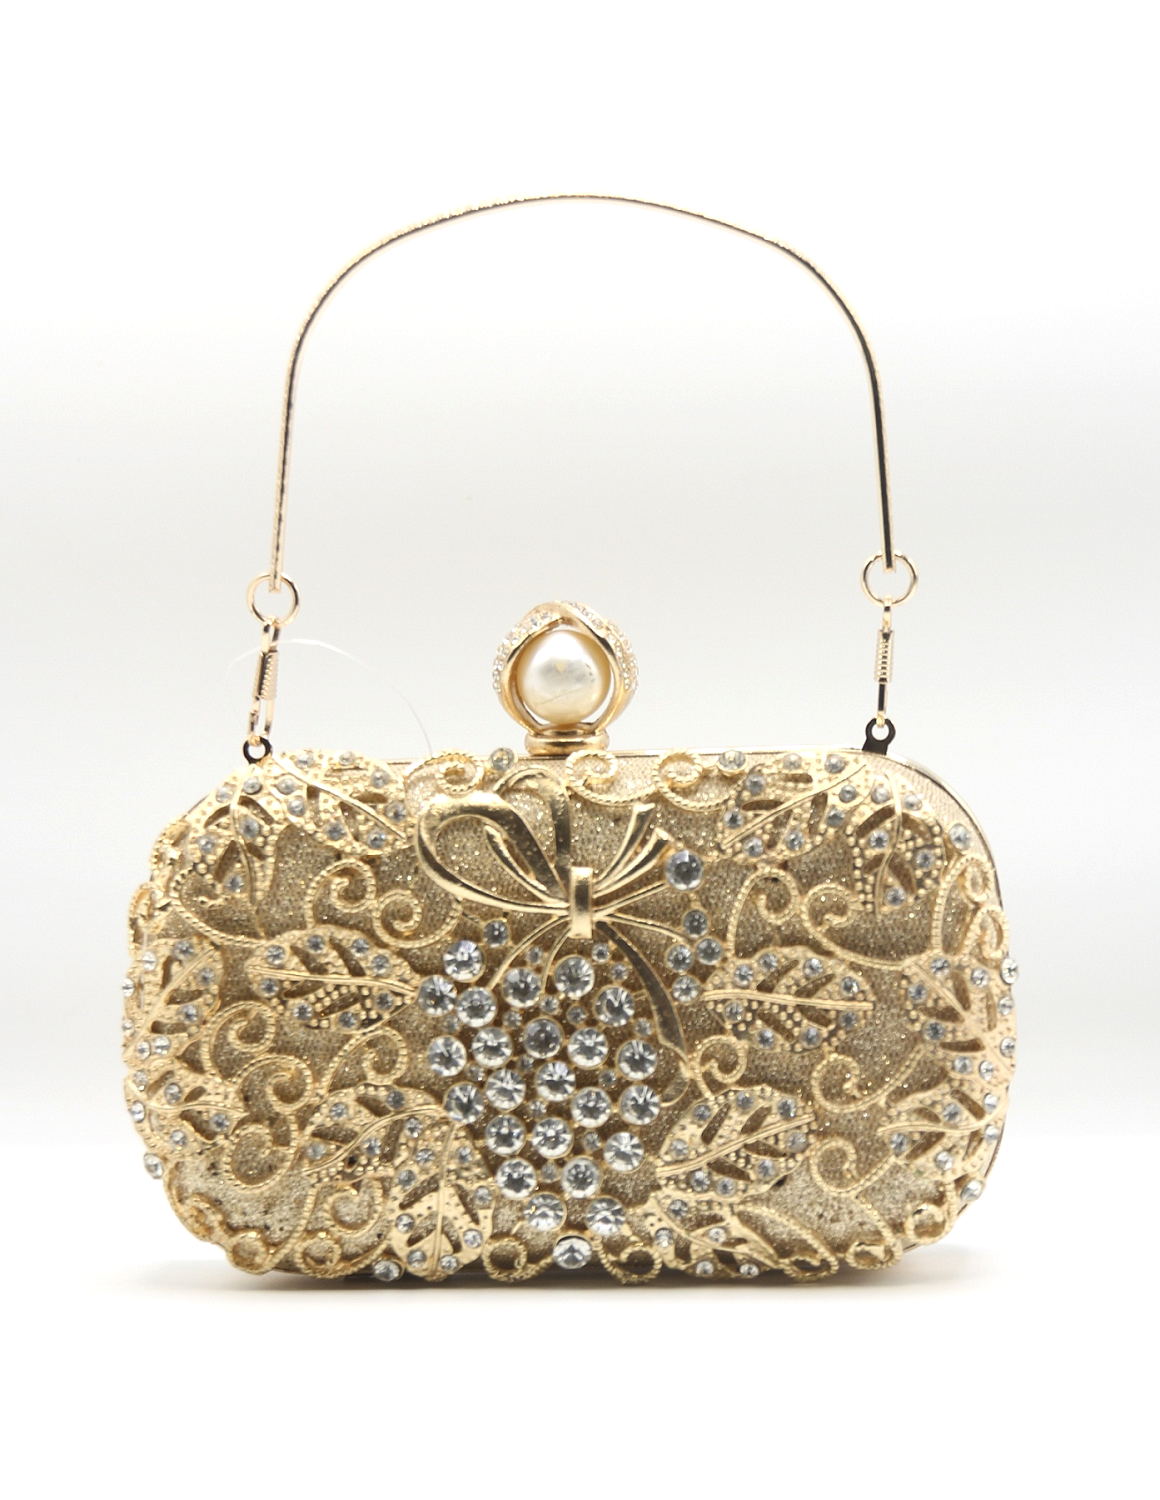 Golden Clutch Bag for Special Occasions in Pakistan